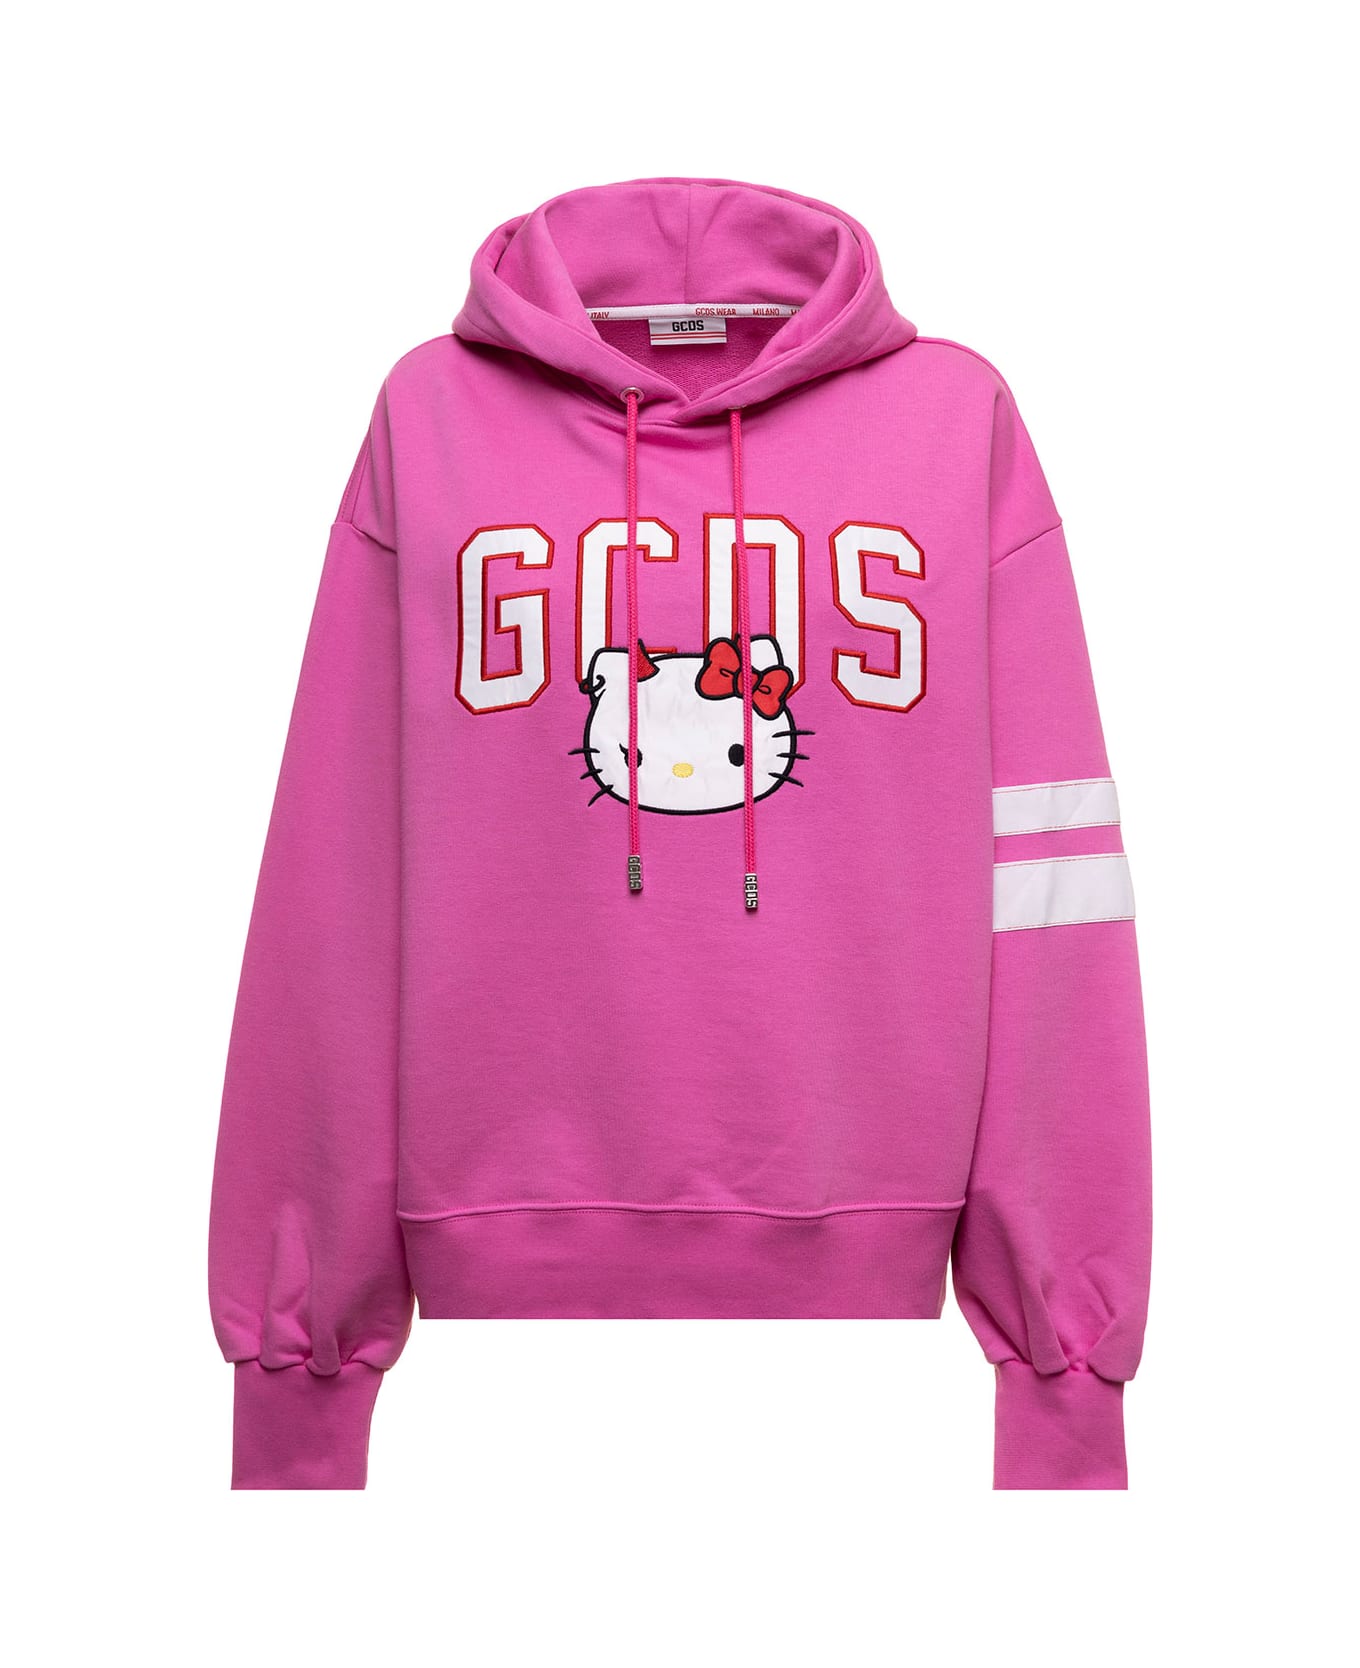 GCDS Pink Jersey Hoodiie In Fleece Cotton With Hello Kitty Print And Contrast Bands Gcds Woman - Pink